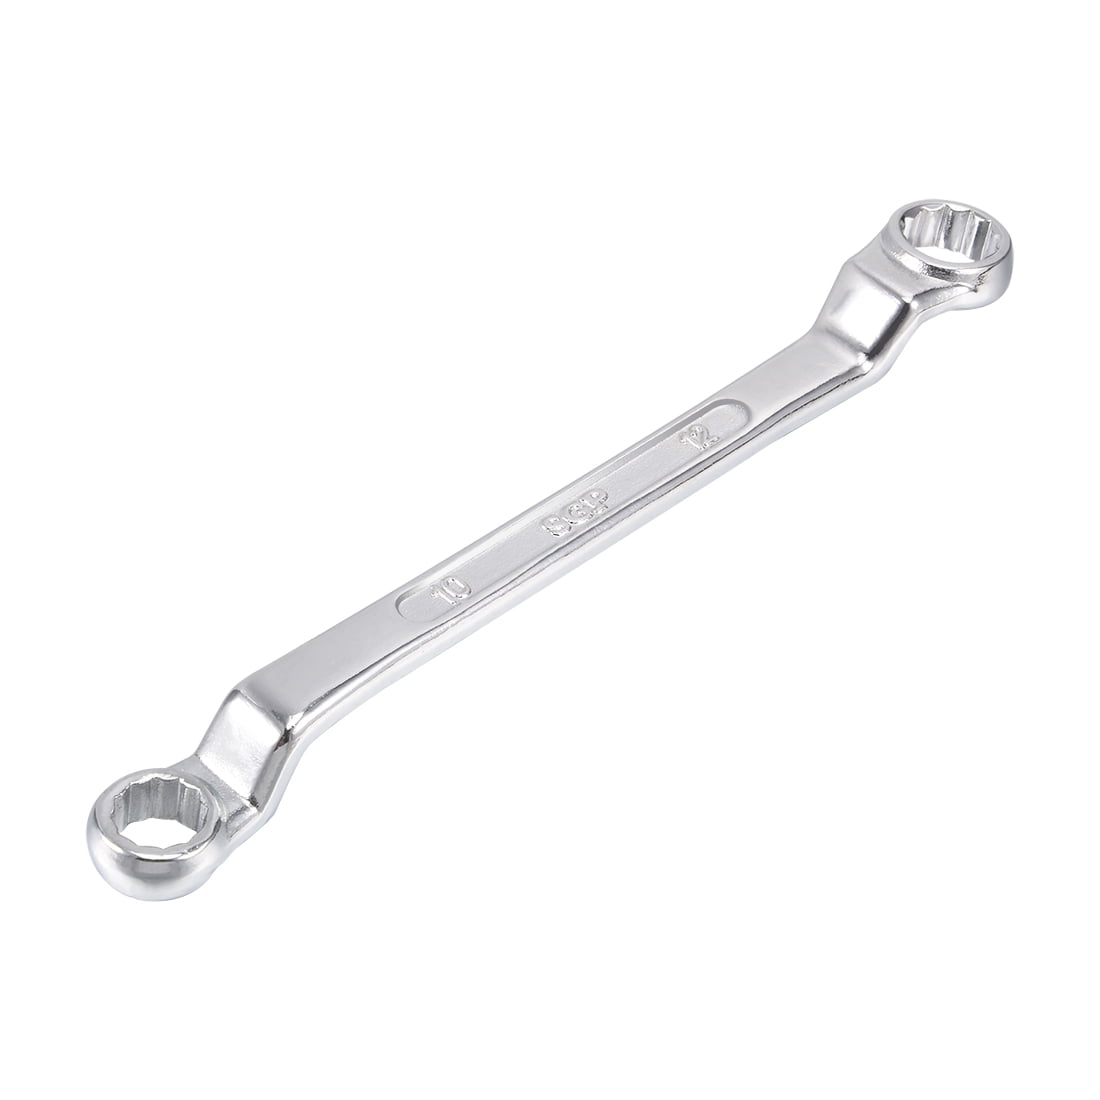 uxcell Metric Double Open End Wrench 14mm x 17mm 